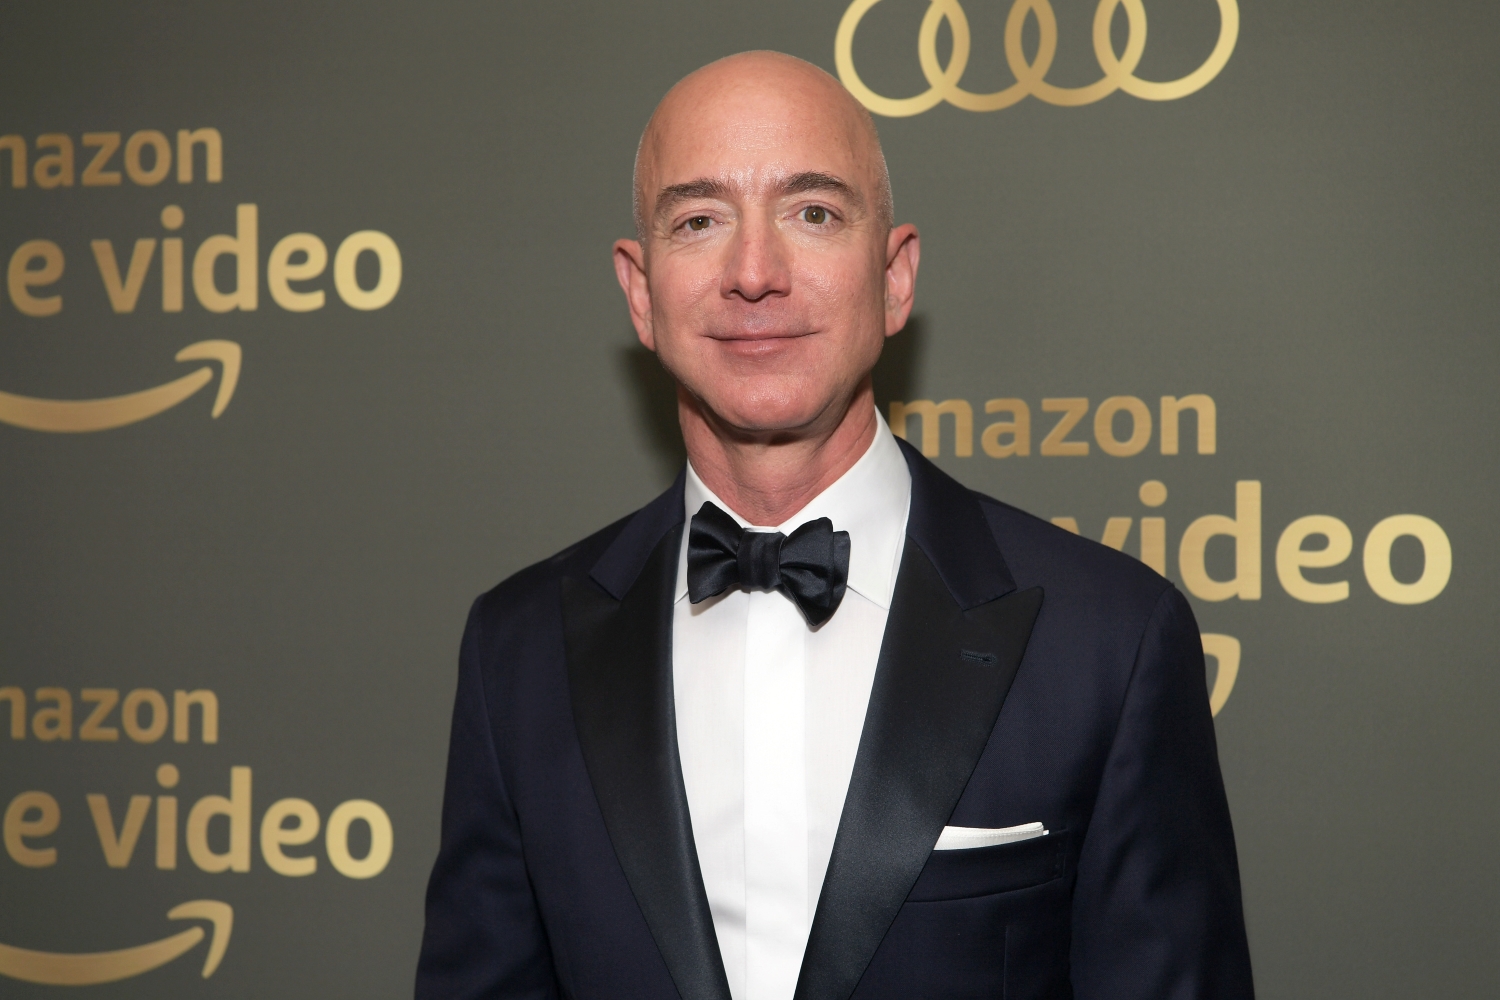 Amazon CEO Jeff Bezos attends the Amazon Prime Video's Golden Globe Awards After Party at The Beverly Hilton Hotel.